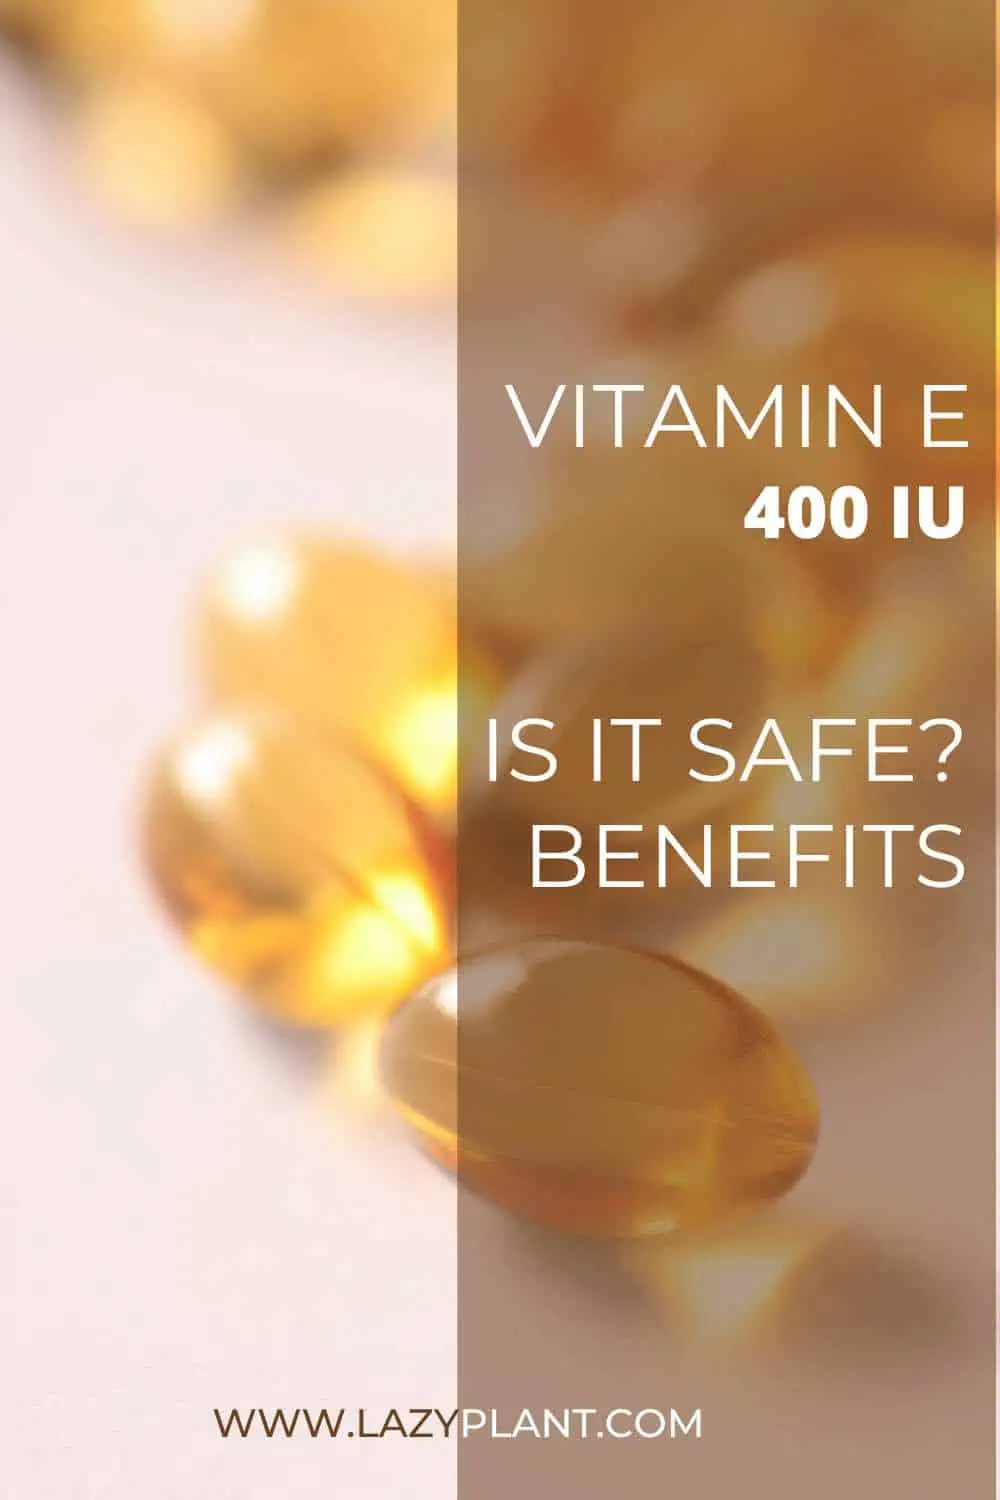 Benefits of taking 400 IU of vitamin E per day from supplements!